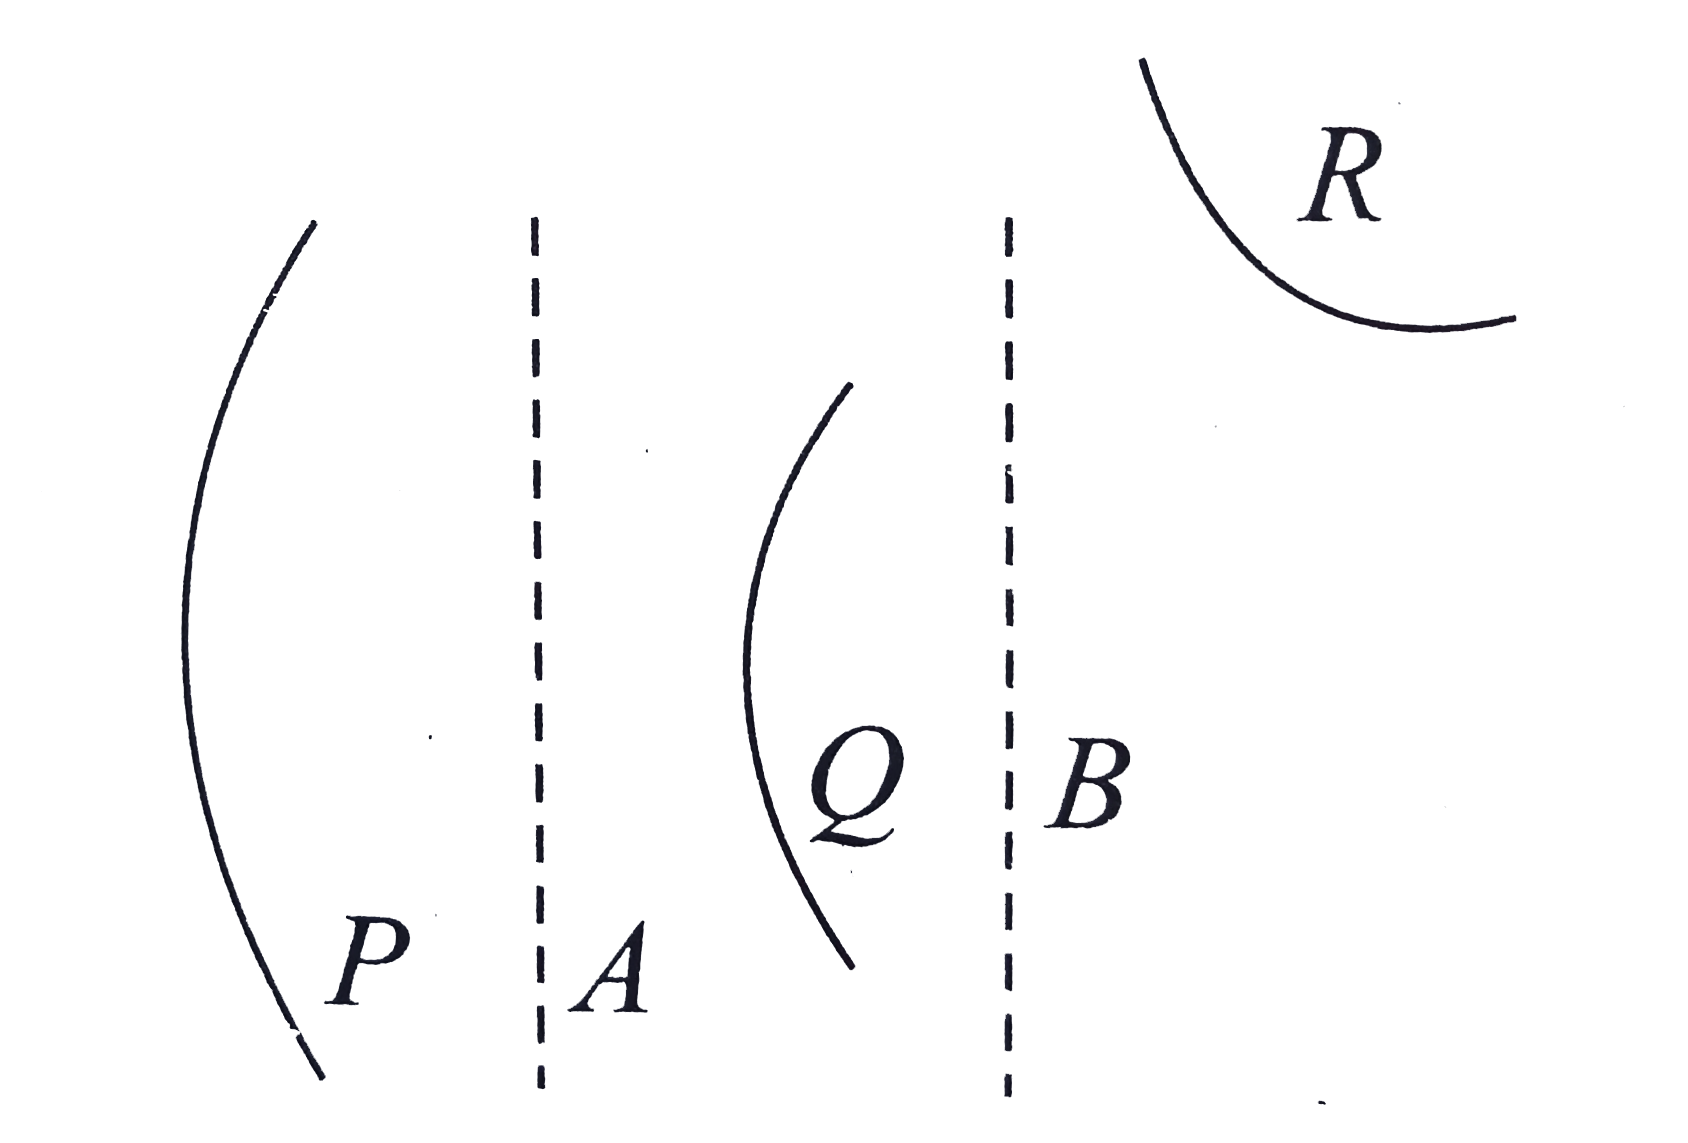 Figure shows wavefront P Passing through two systems A and B, and emerging as Q and then as R. Then systems A and B could, respectively, be